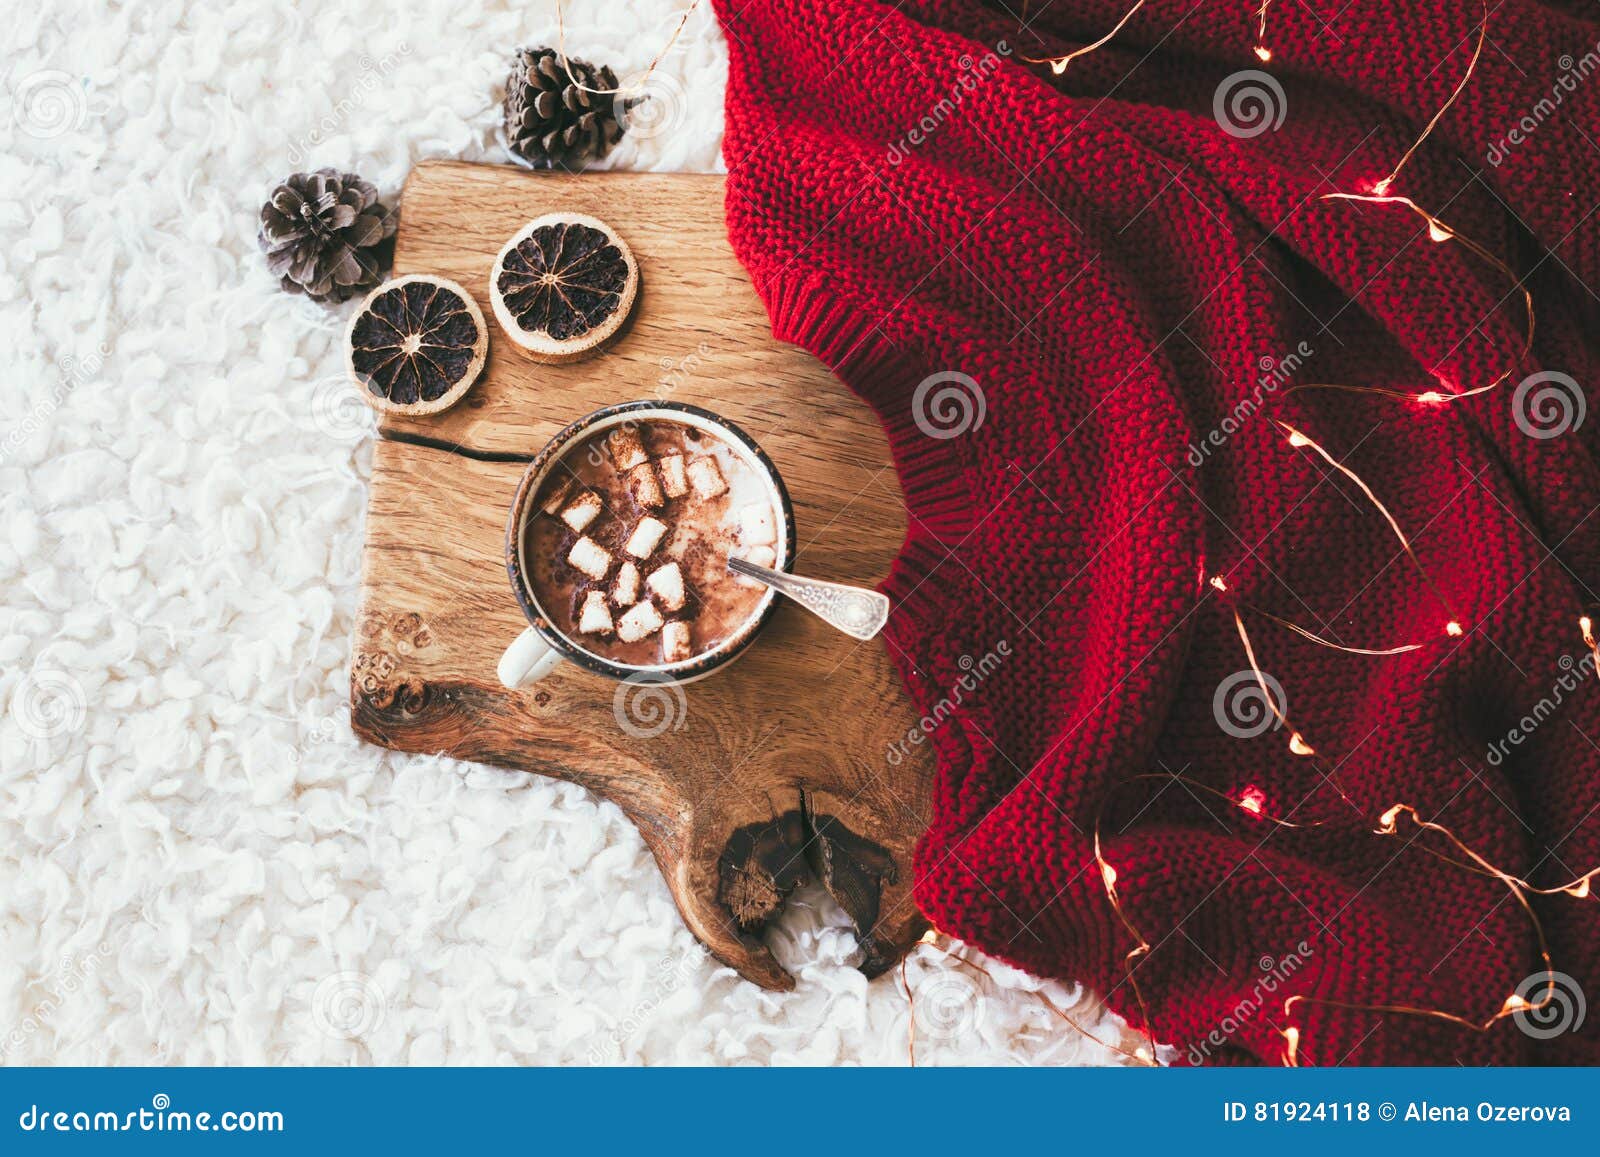 winter homely decor